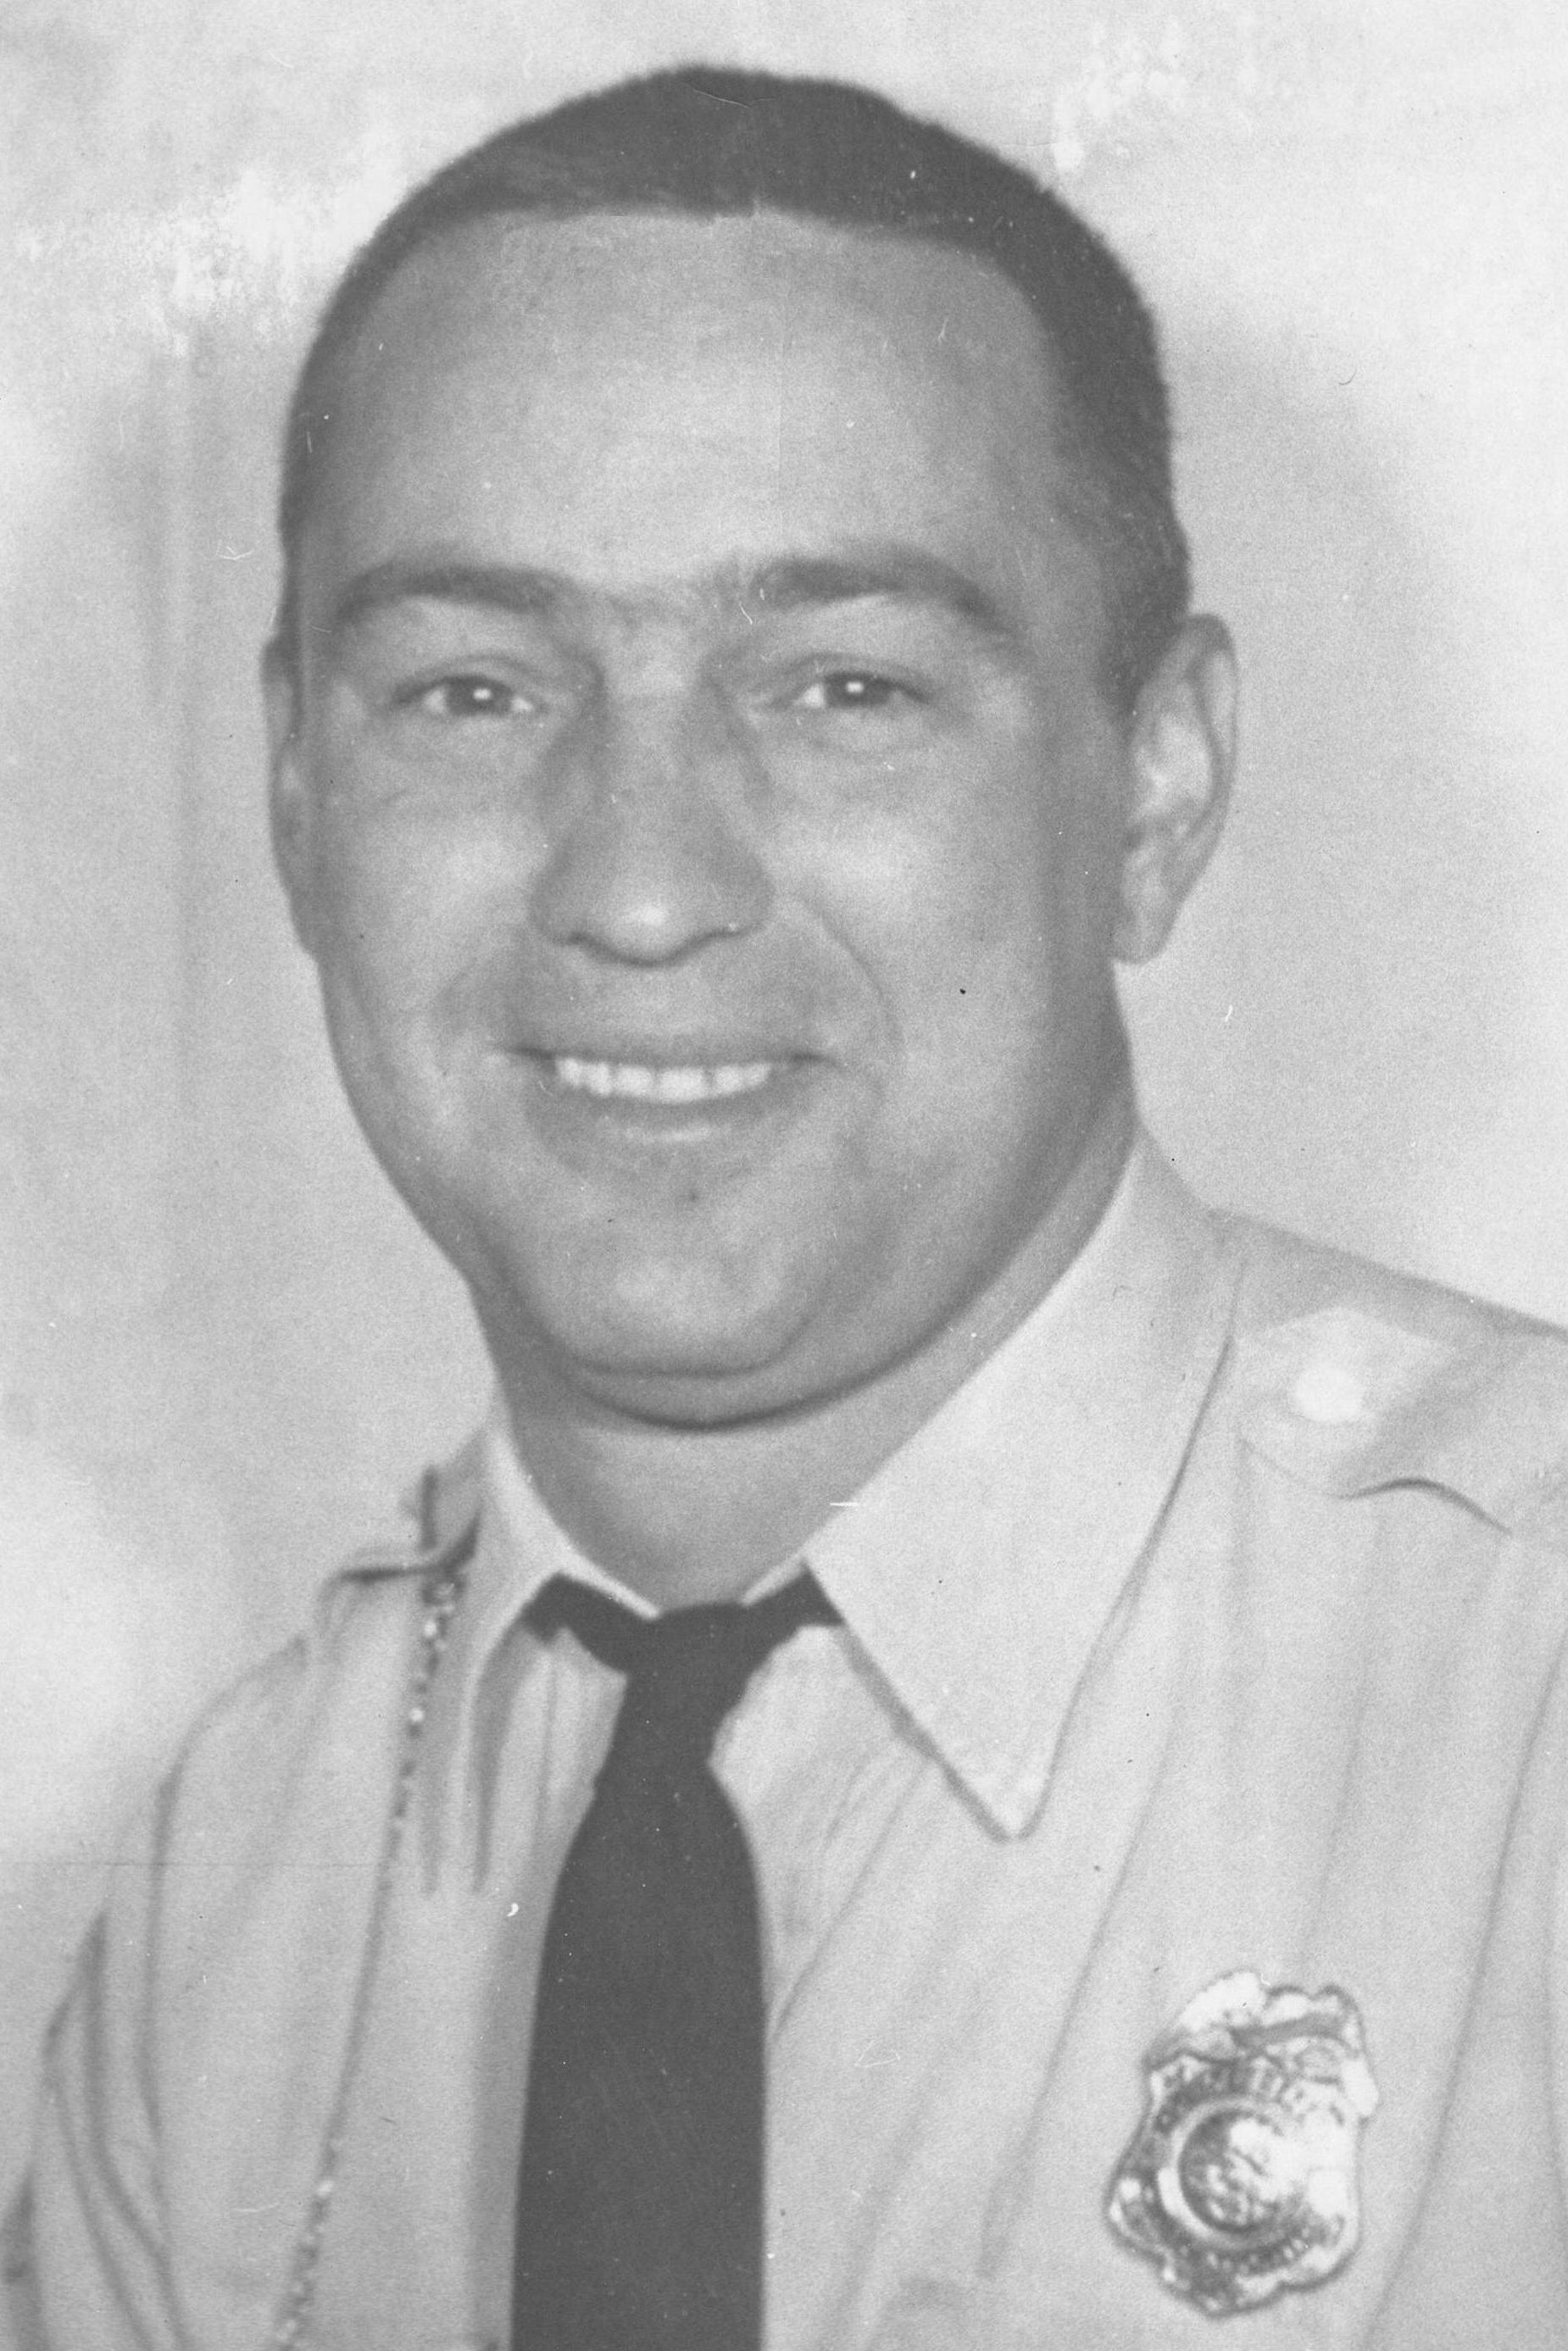 Reserve Officer Harold L. Wintrow | Akron Police Department, Ohio